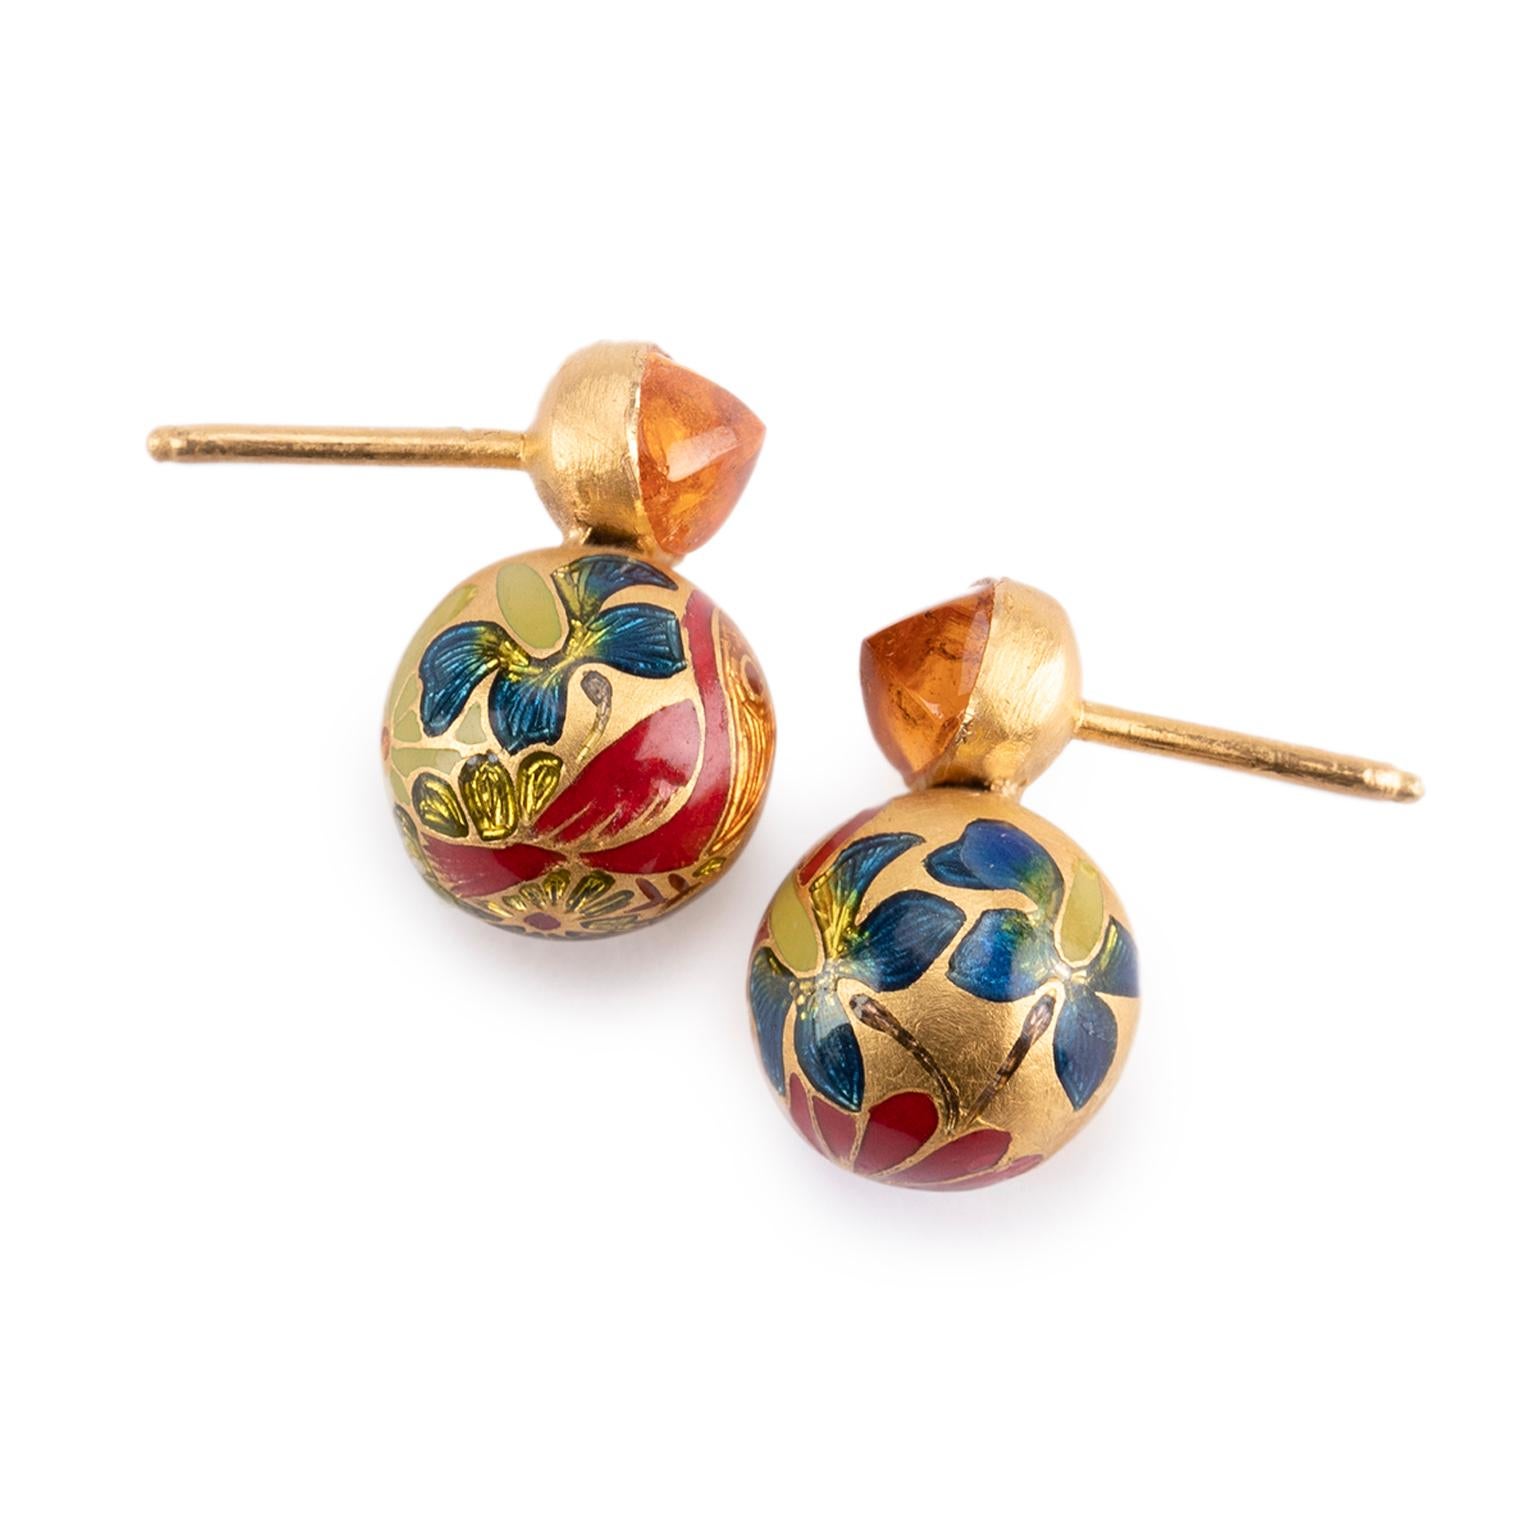 These beautiful floral studs are from Agaro Jewels' whimsical Bloom collection. The studs have been hand engraved and enameled with hot fired glass enamel using an ancient 17th century jewelry making art from the ateliers of the Mughal Court. The